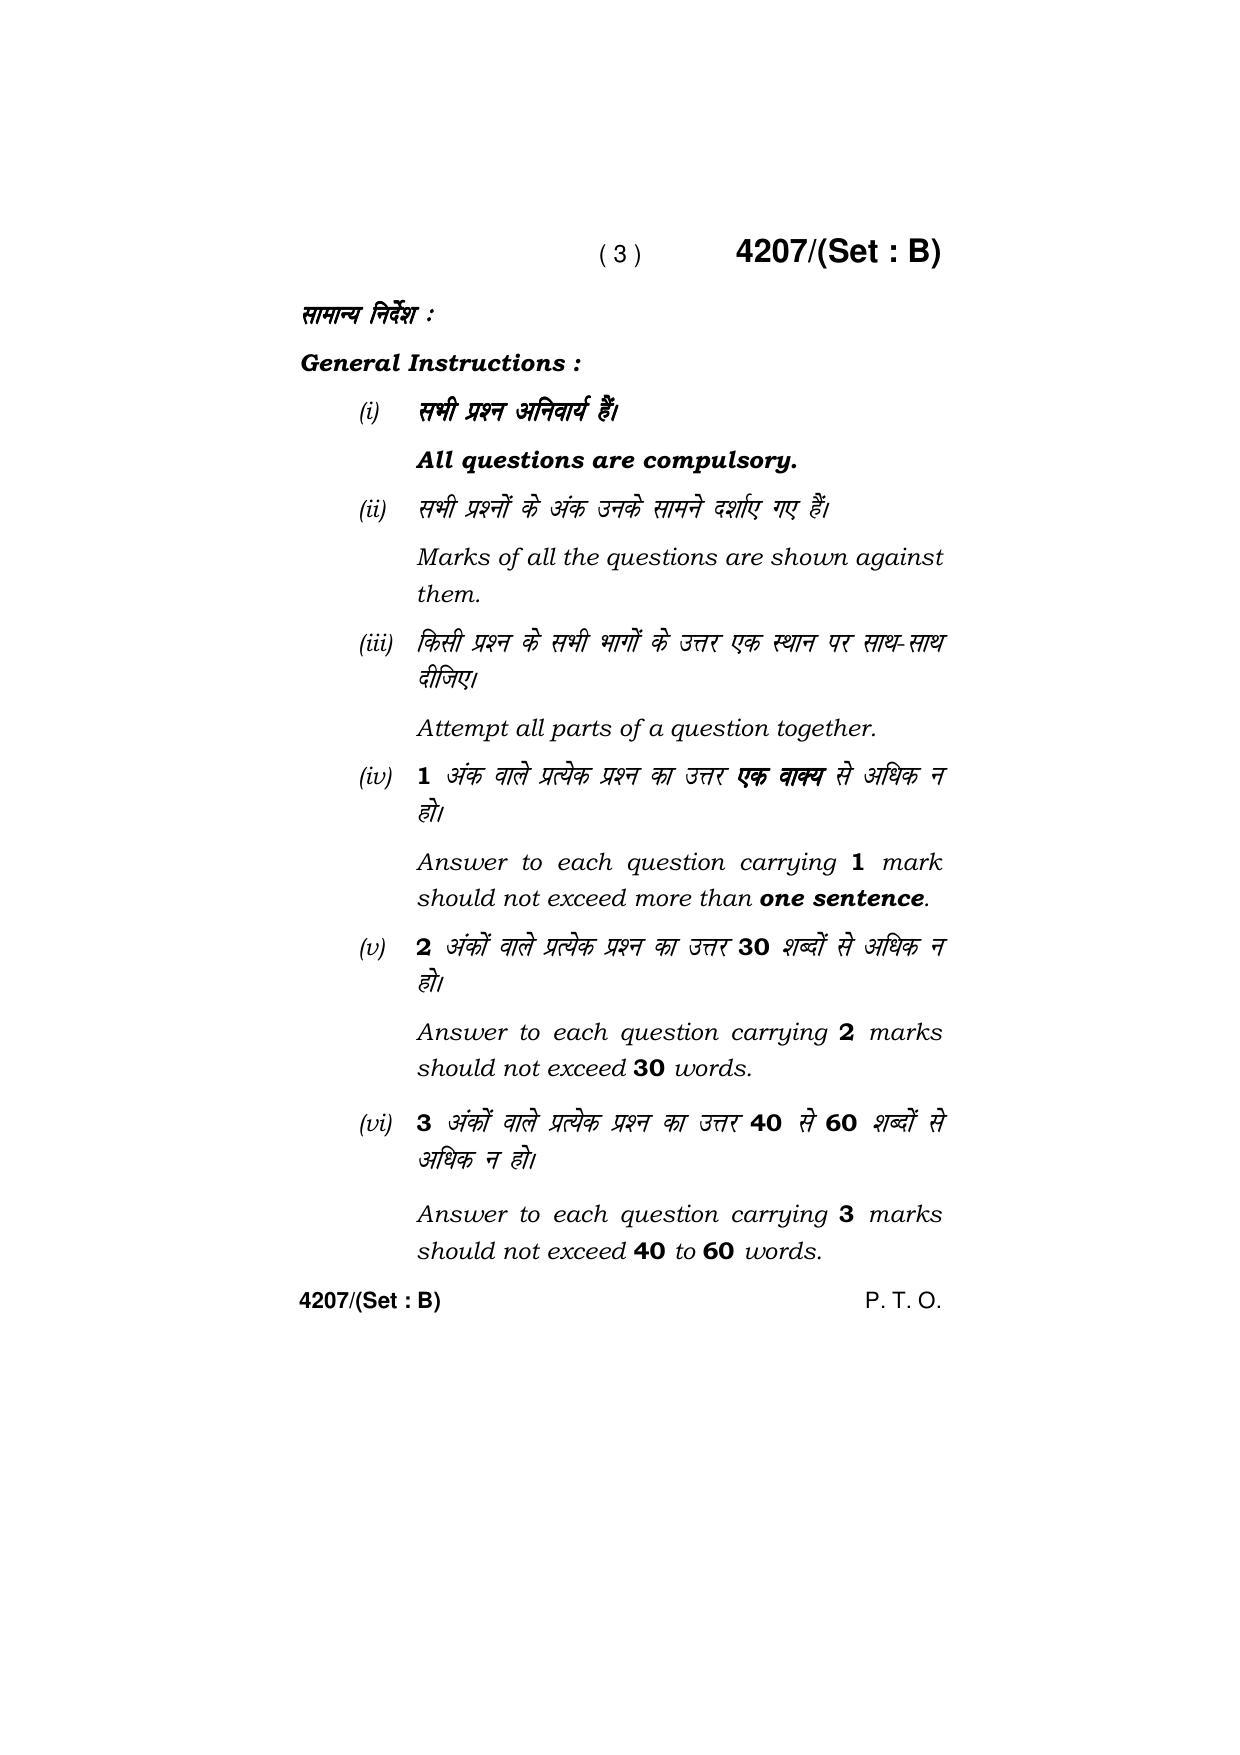 Haryana Board HBSE Class 10 Social Science (All Set) 2019 Question Paper - Page 18